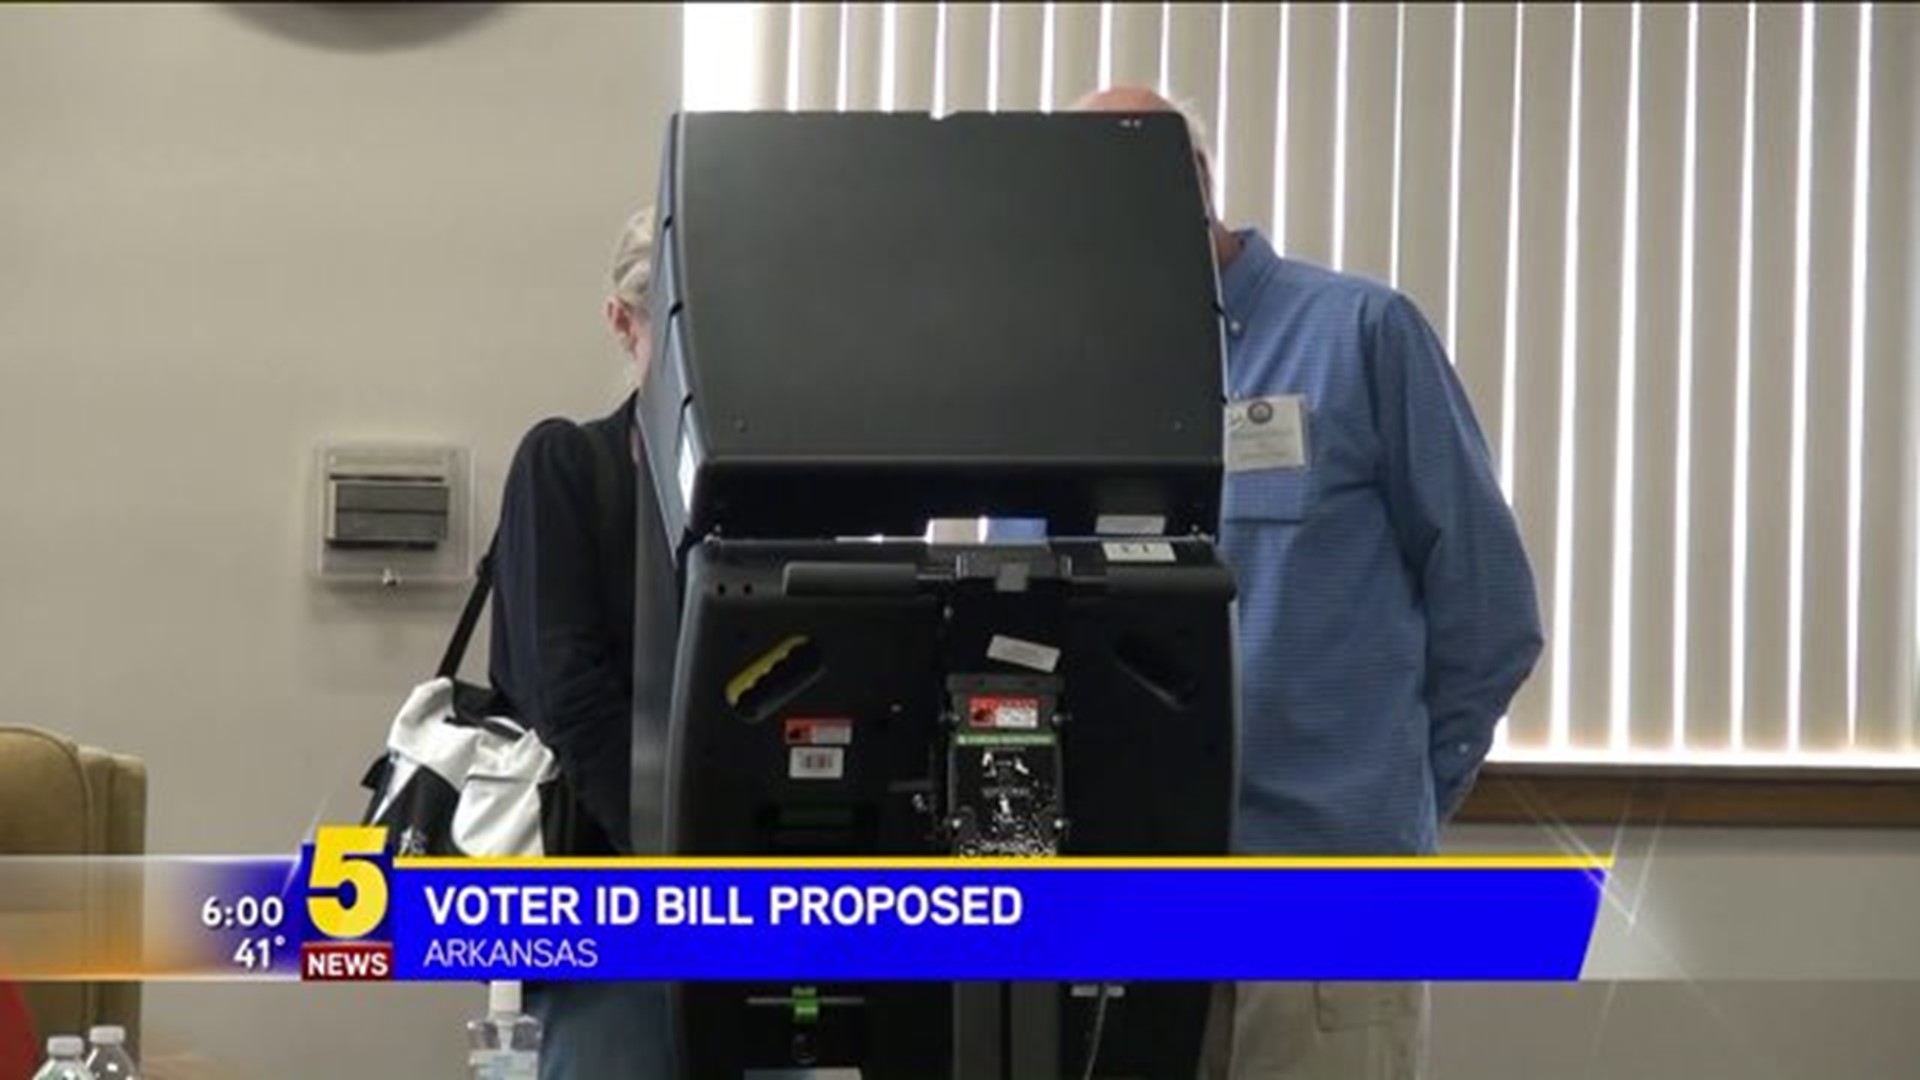 Rep. Mark Lowery speaks about his proposed Voter ID bill in Arkansas.